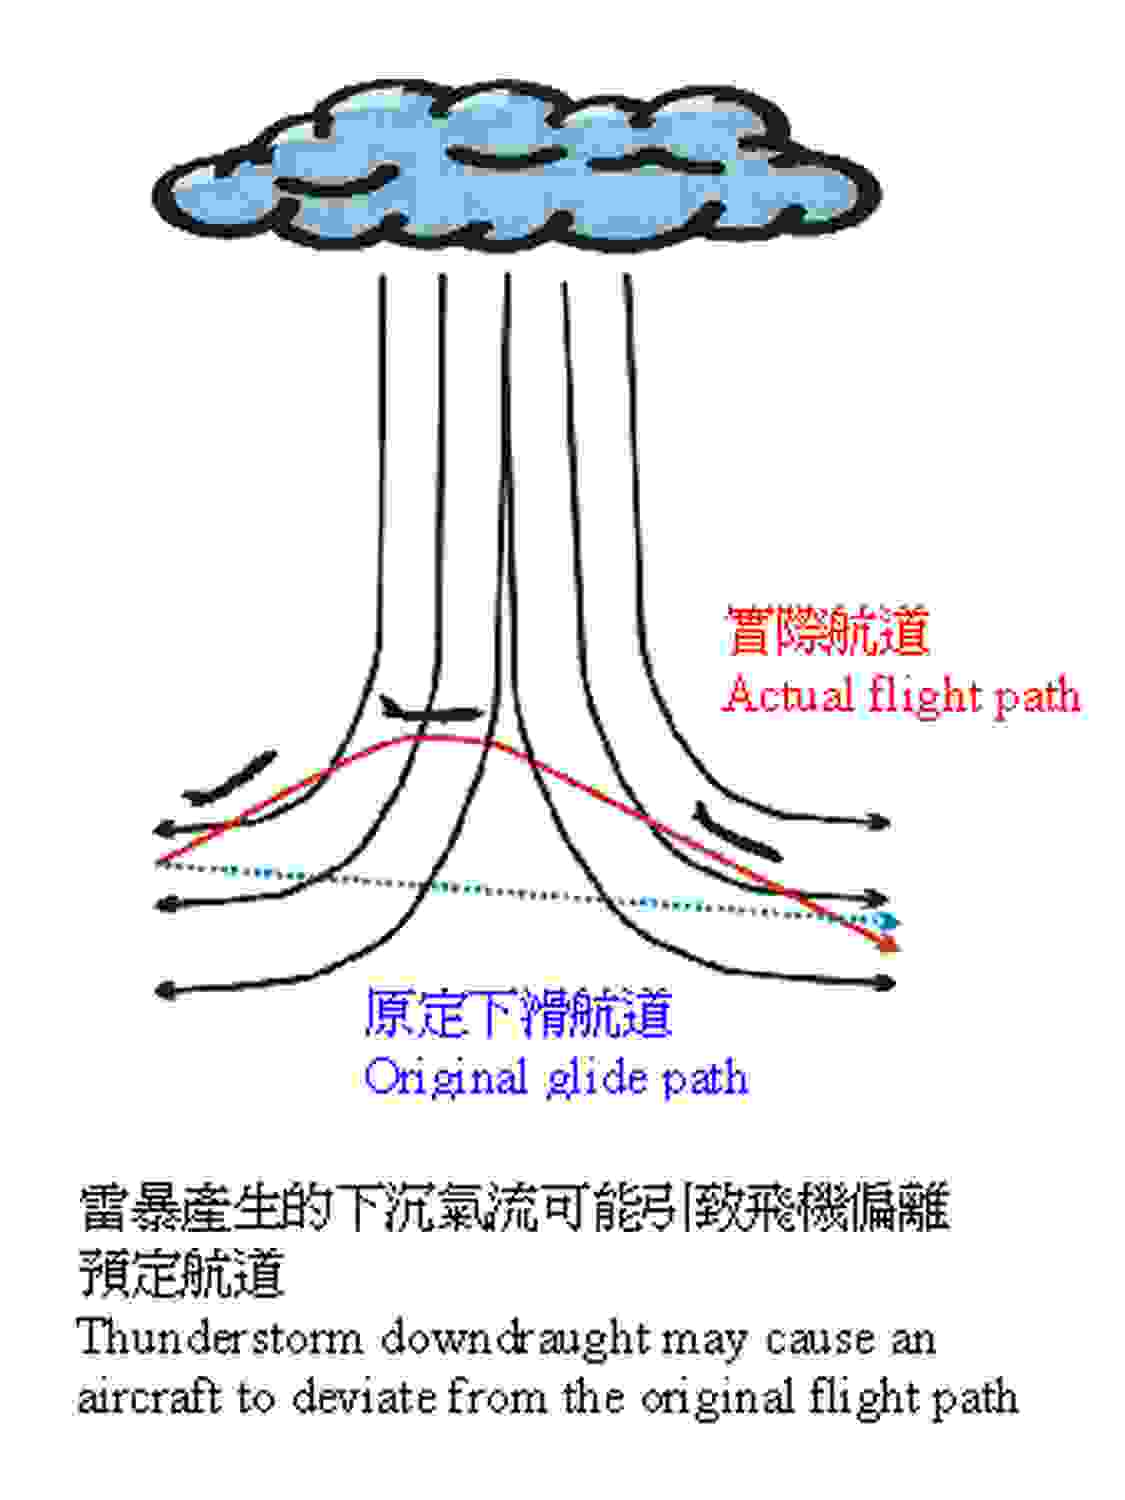 Thunderstorm downdraught may cause an aircraft to deviate from the original flight path